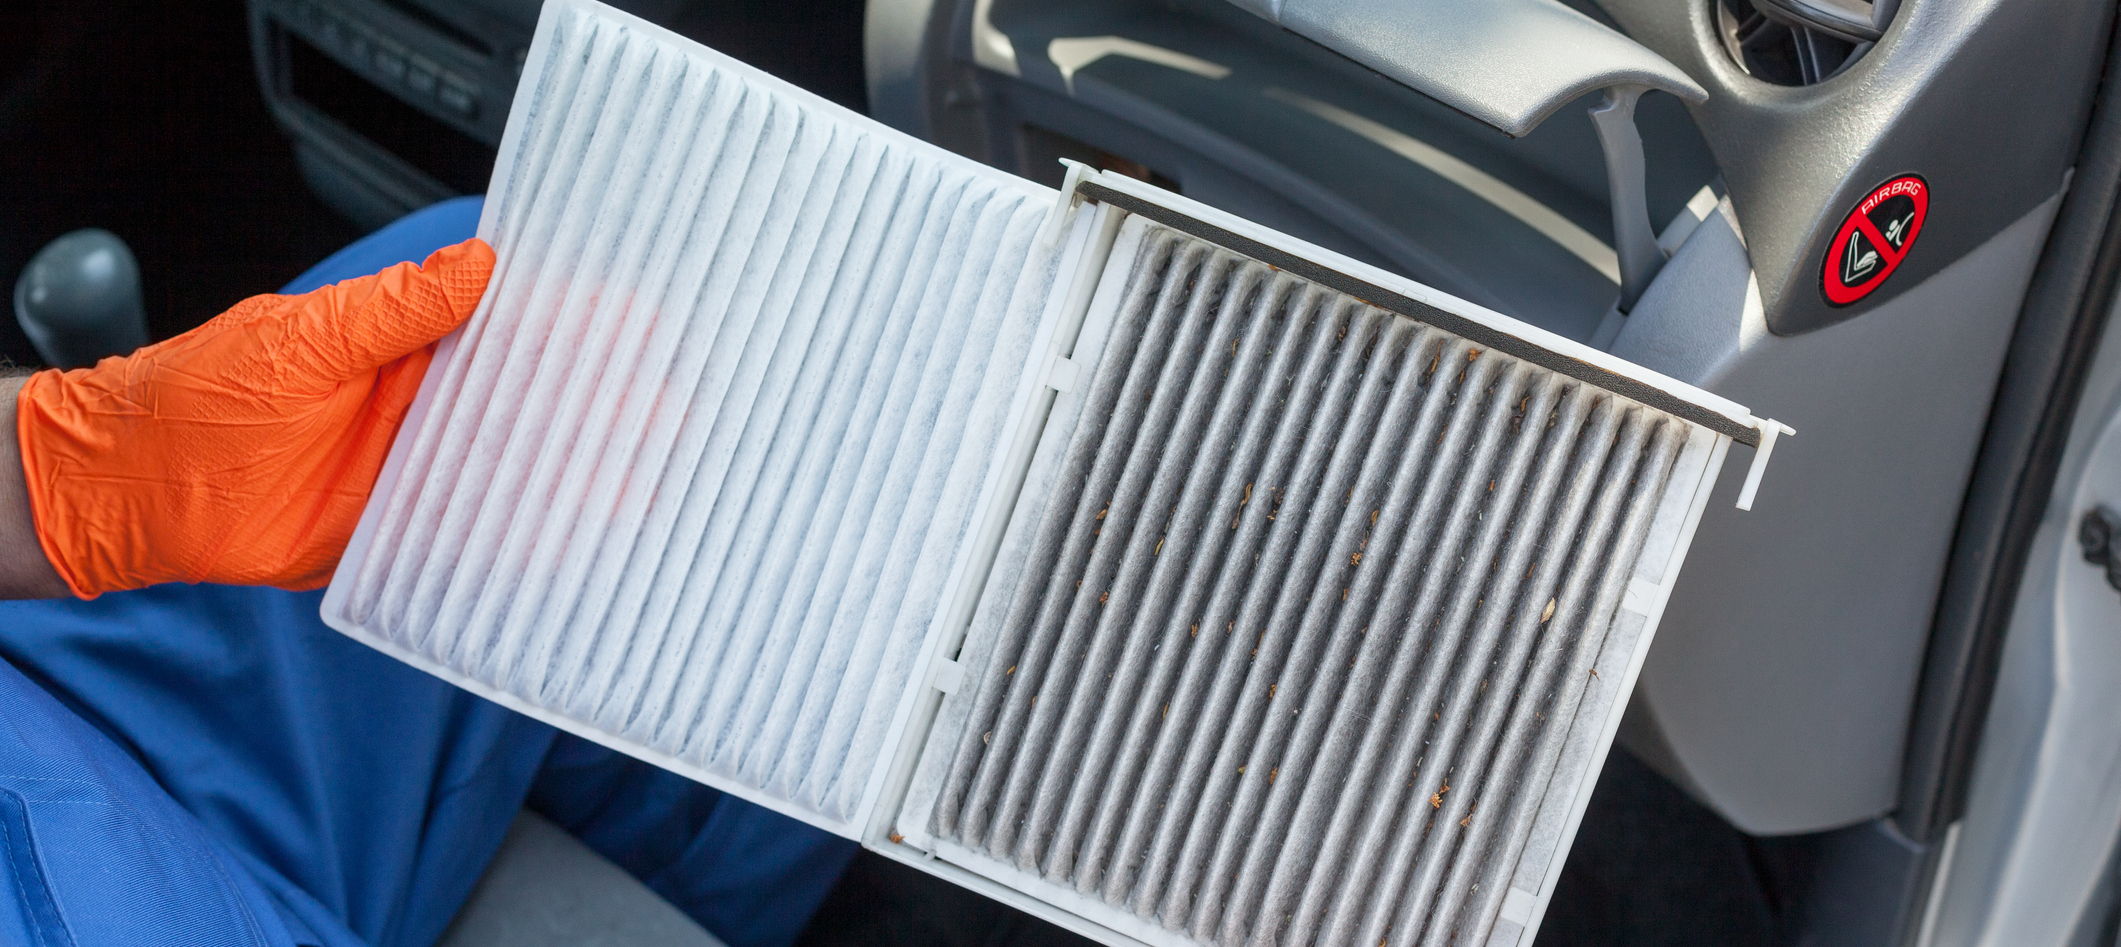 2019 Buick Enclave Cabin Air Filter Location – Gadisyuccavalley 2018 Buick Enclave Cabin Air Filter Replacement